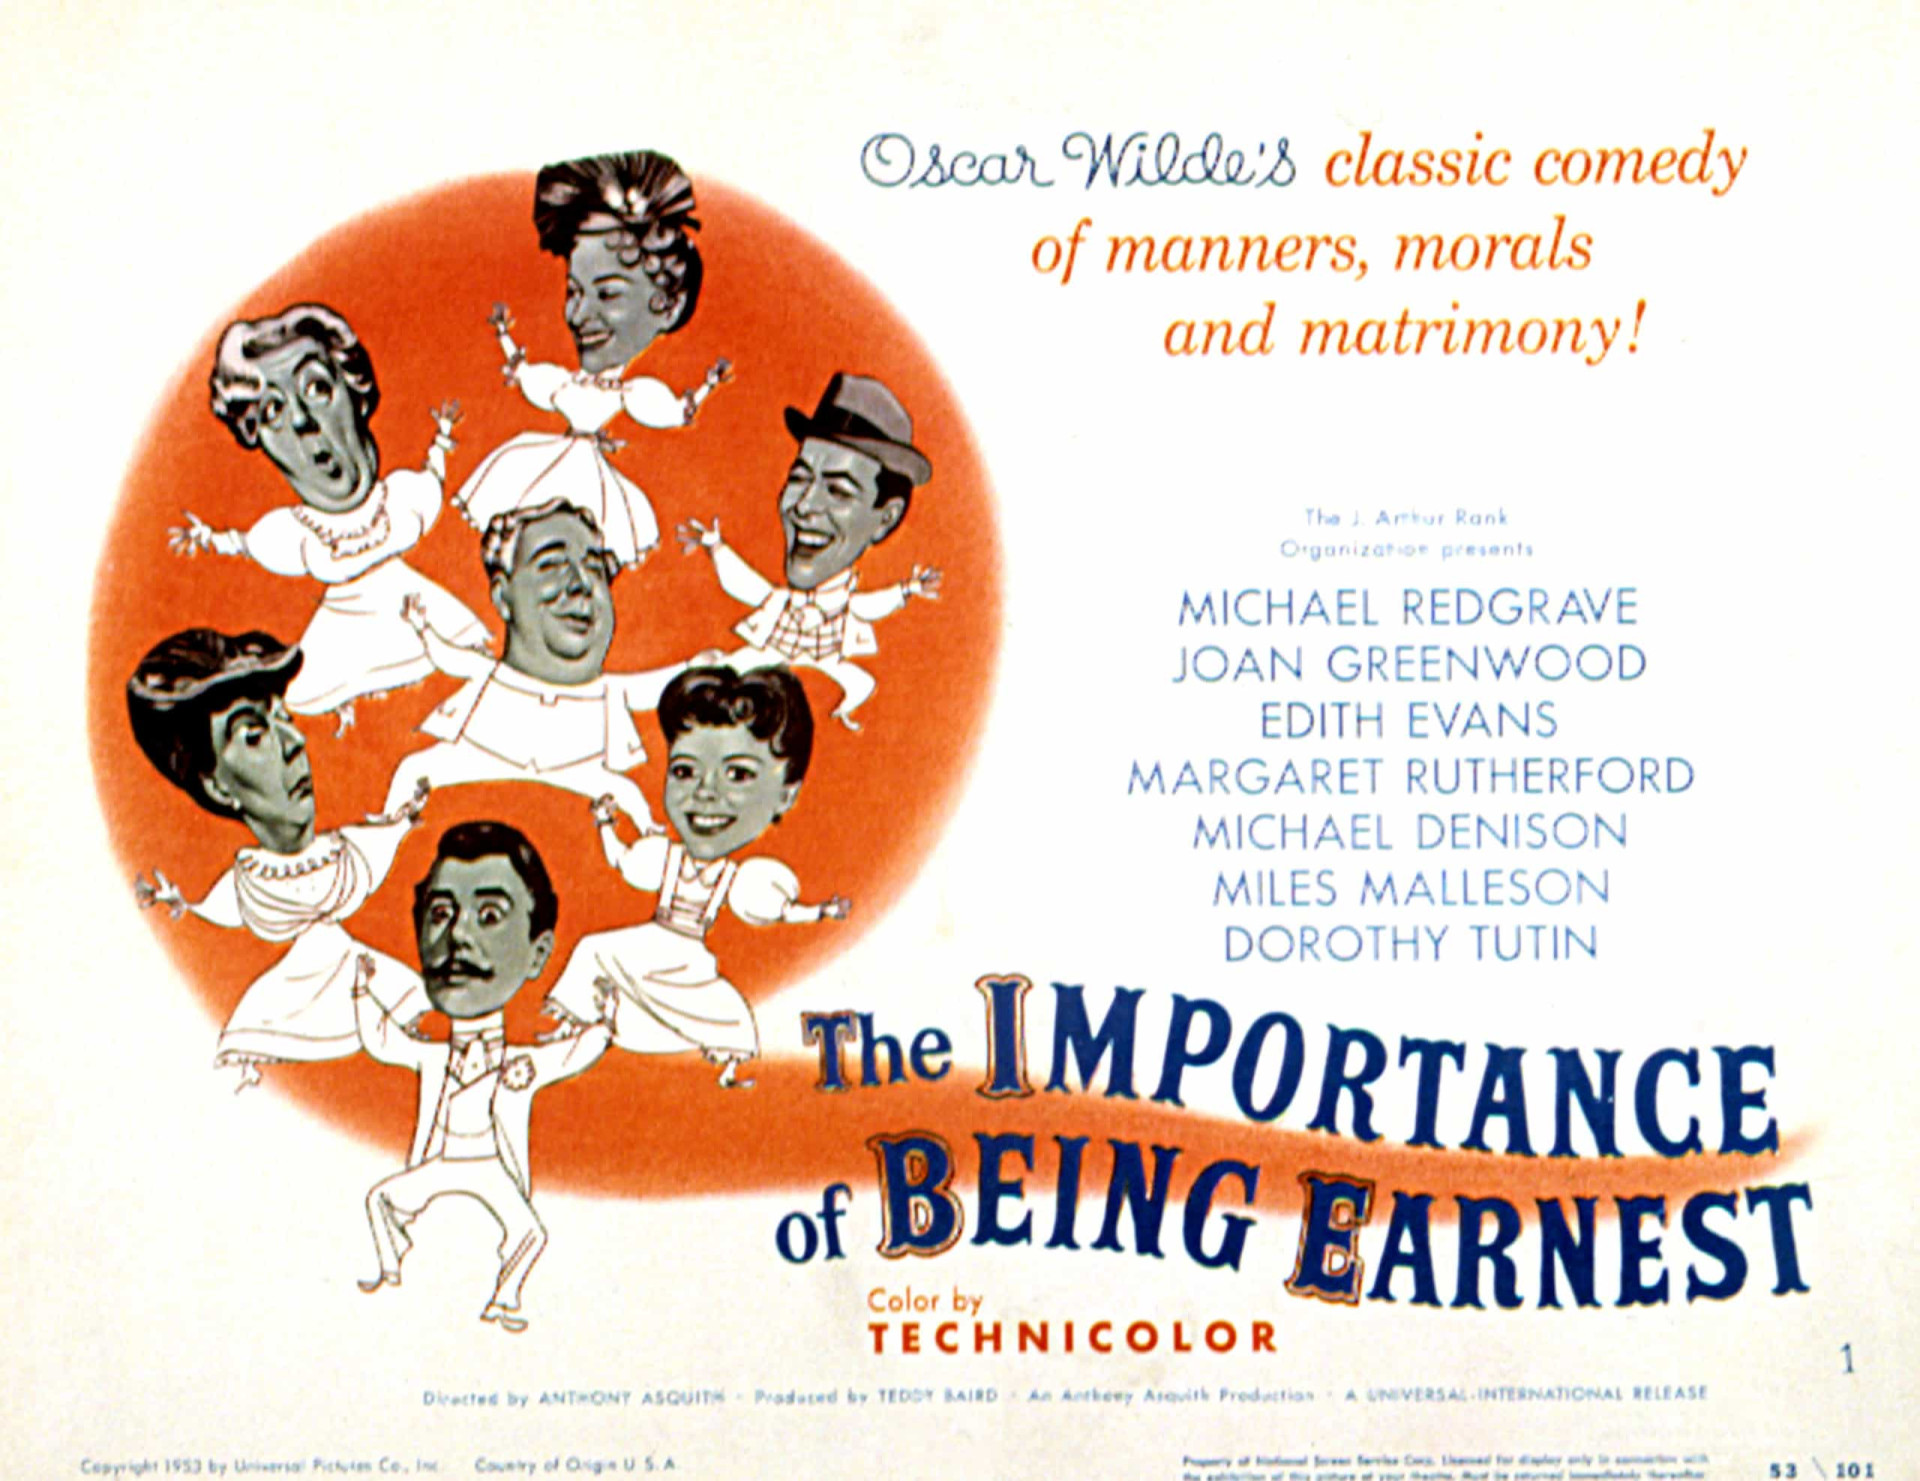 <p>The most celebrated screen outing is the 1952 version, which remains largely faithful to Wilde's text.</p><p><a href="https://www.msn.com/en-us/community/channel/vid-7xx8mnucu55yw63we9va2gwr7uihbxwc68fxqp25x6tg4ftibpra?cvid=94631541bc0f4f89bfd59158d696ad7e">Follow us and access great exclusive content every day</a></p>